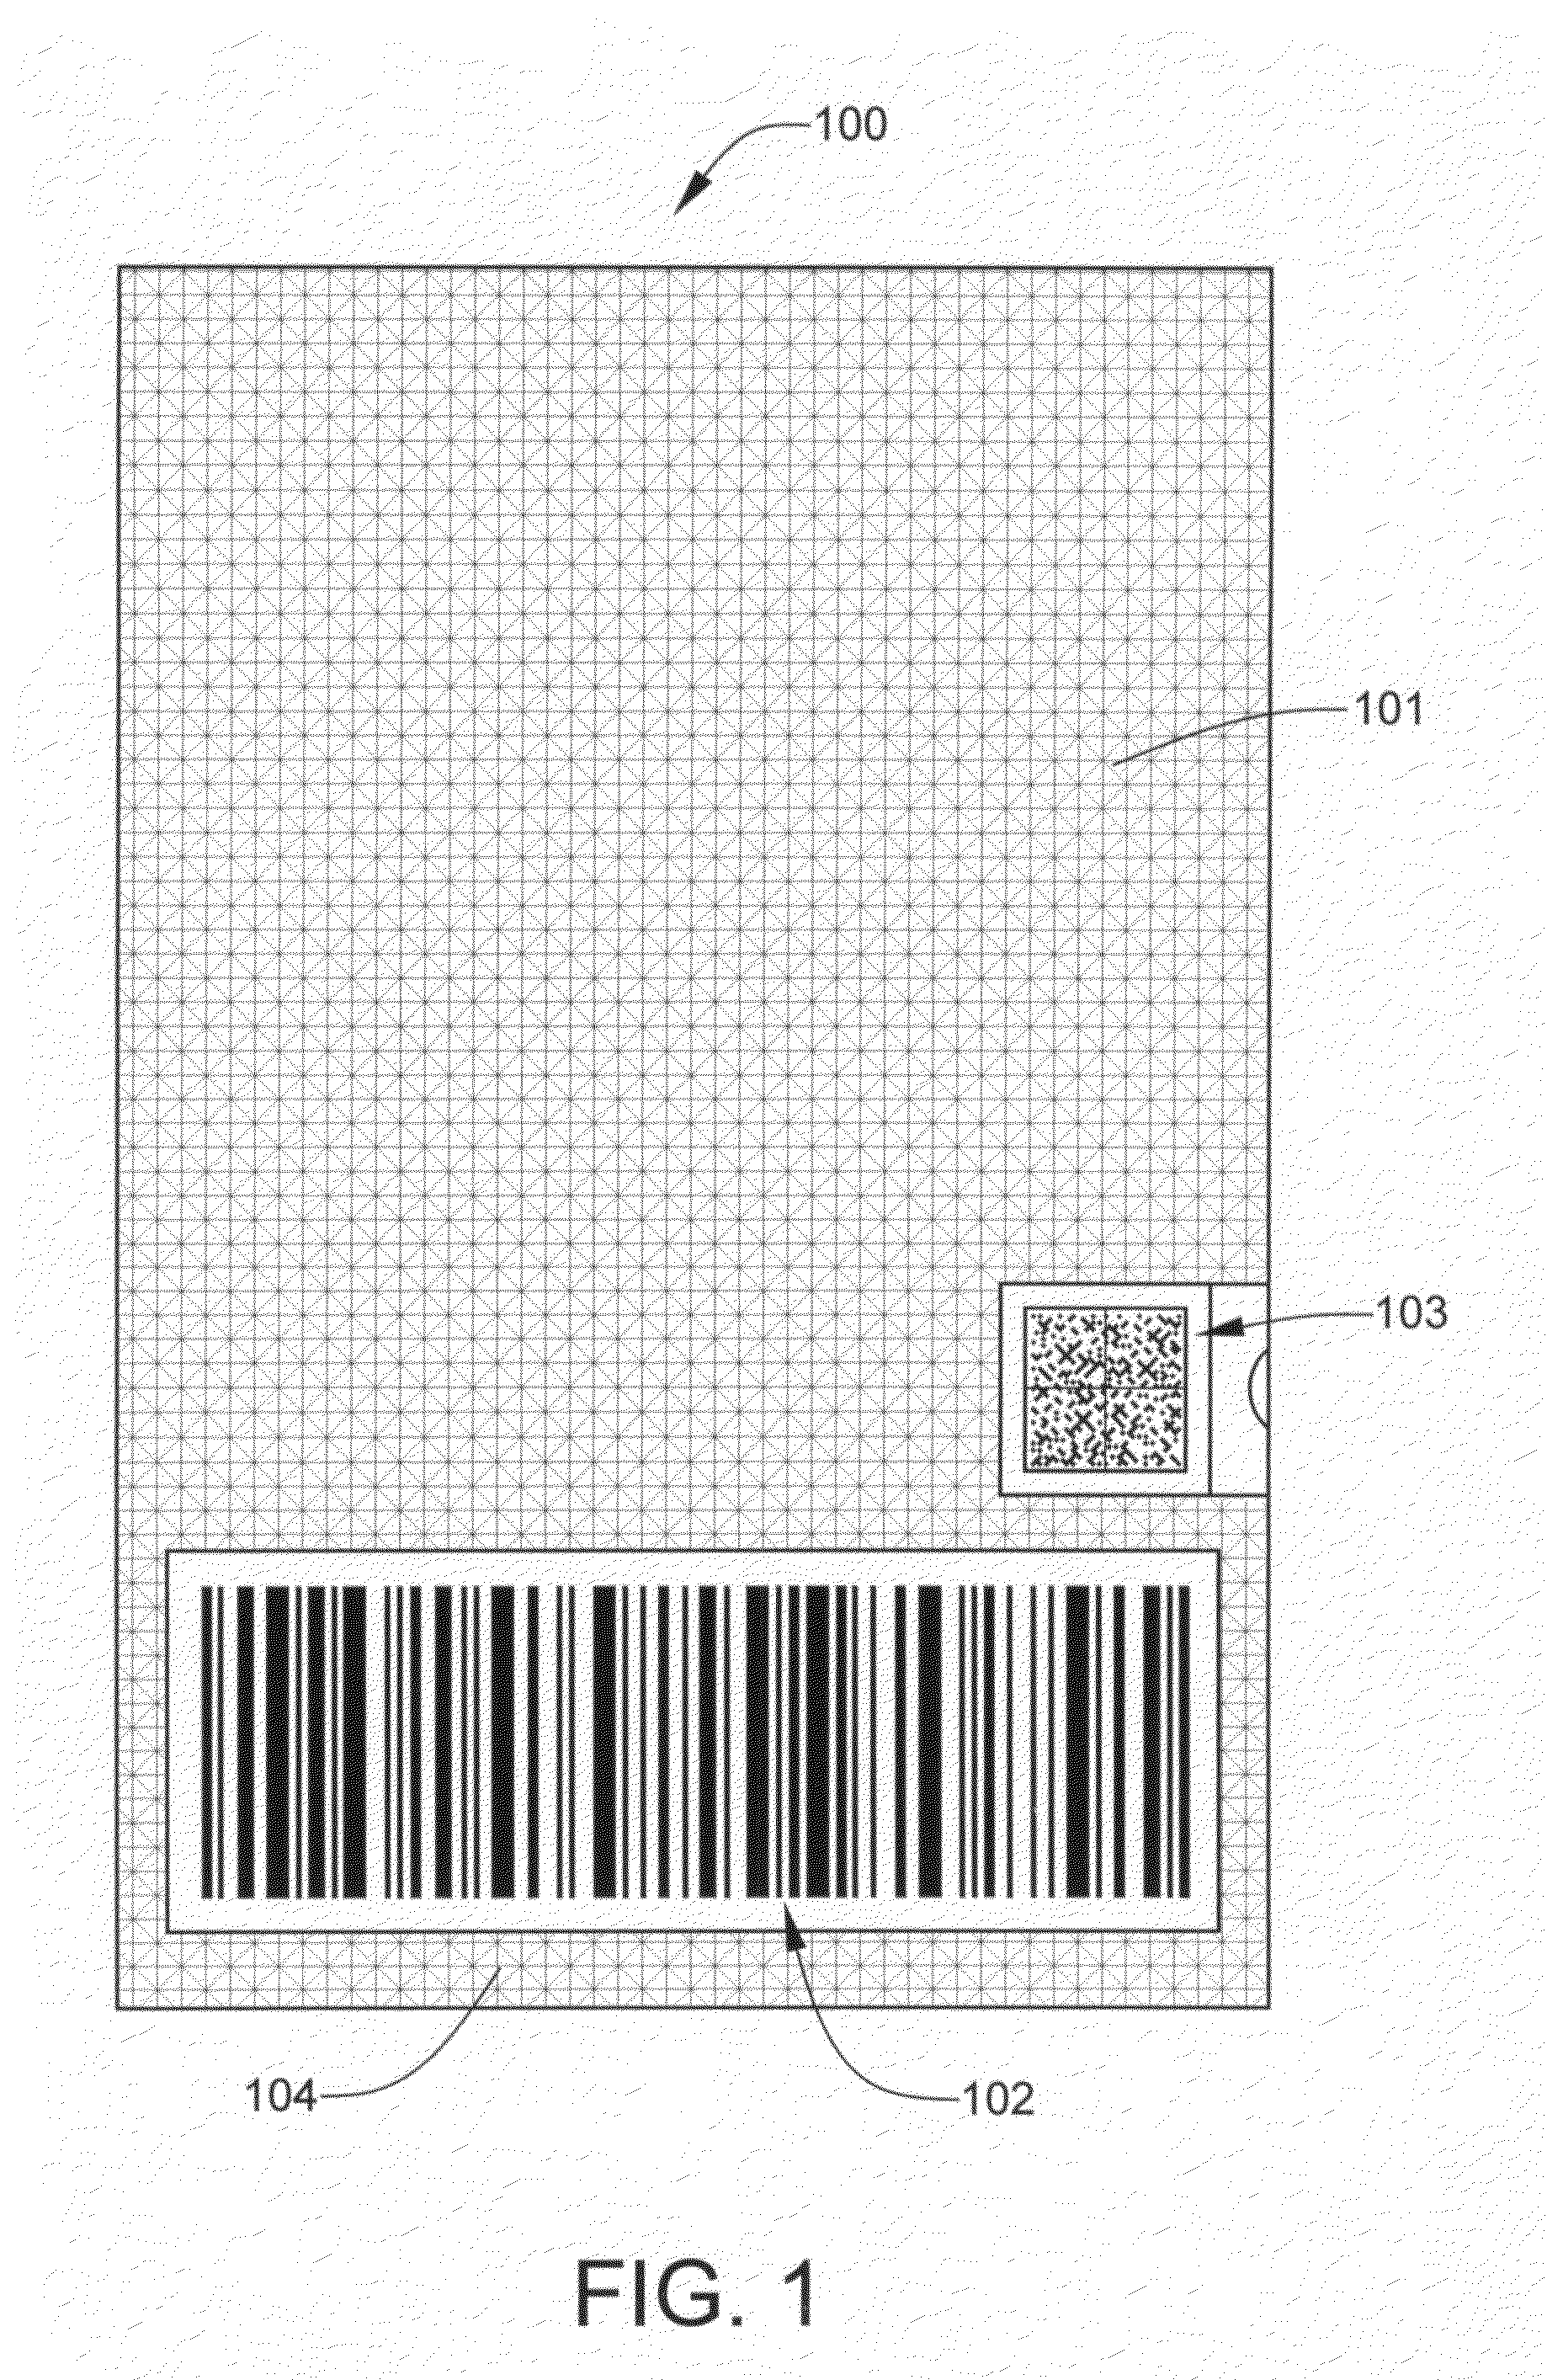 Method of labeling a package for shipment